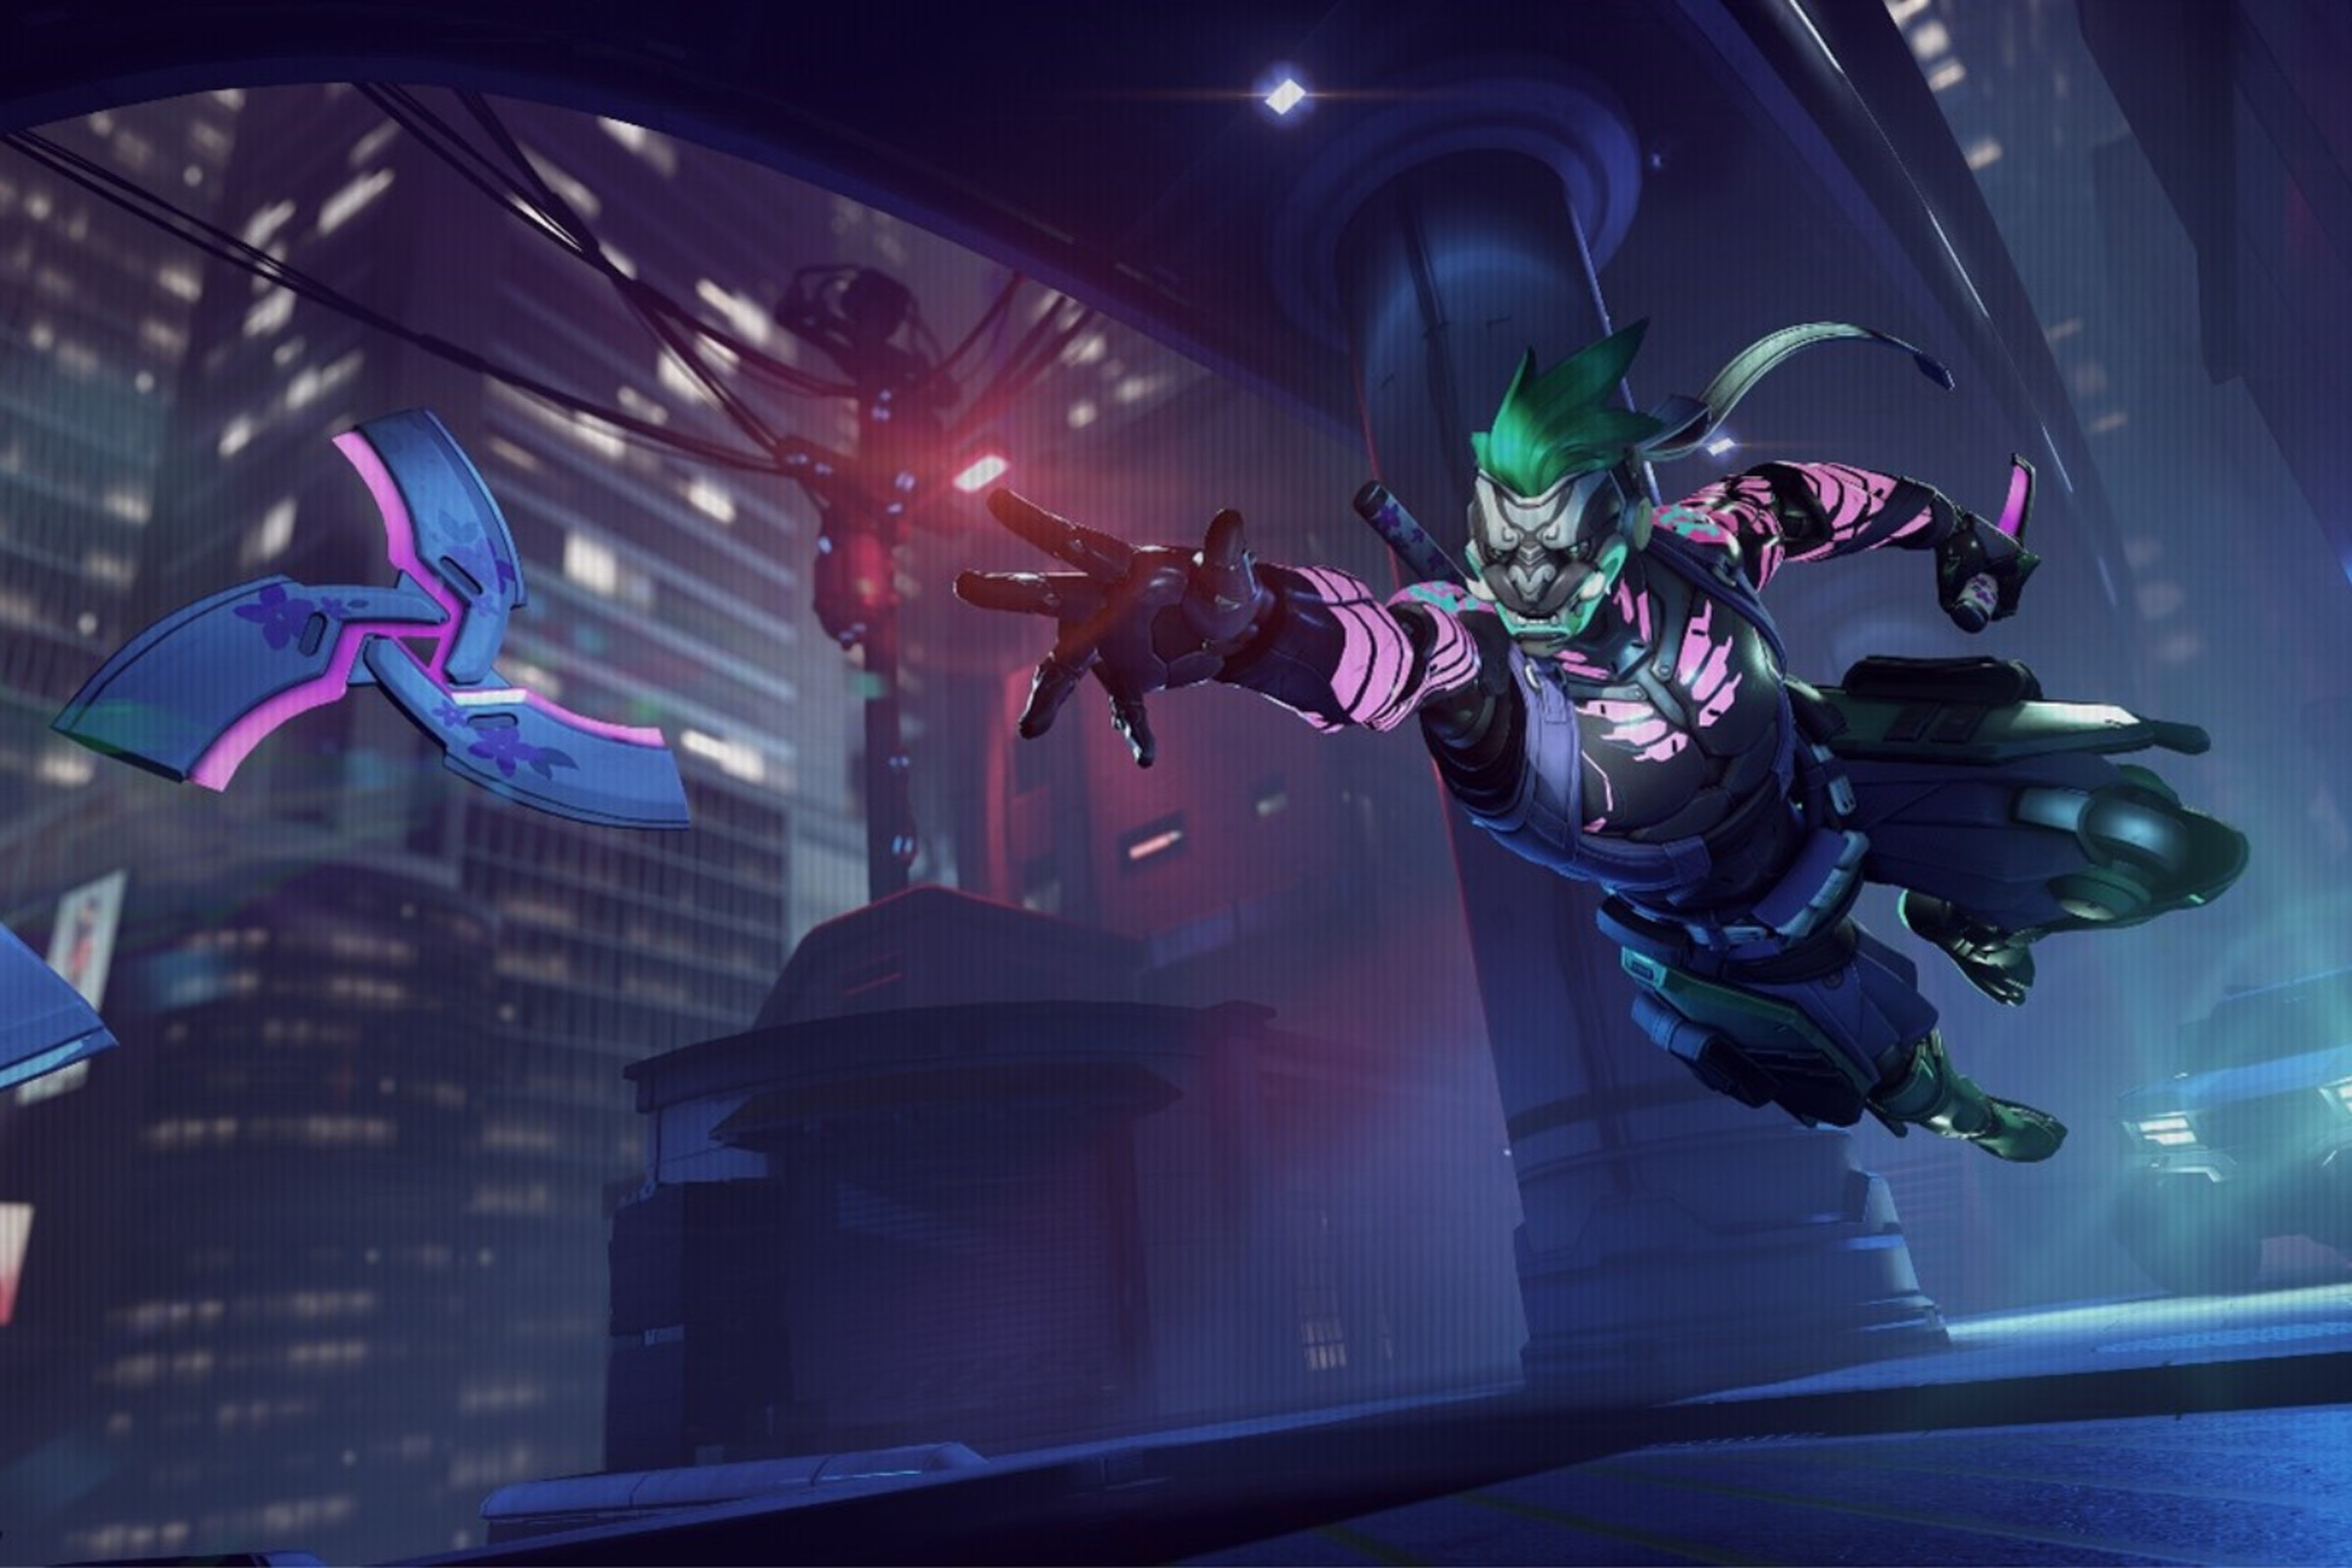 Promotional image from Overwatch 2 featuring the hero Genji, bedecked in a cyberpunk-inspired skin featuring neon tattoos and a bright red demon mask.